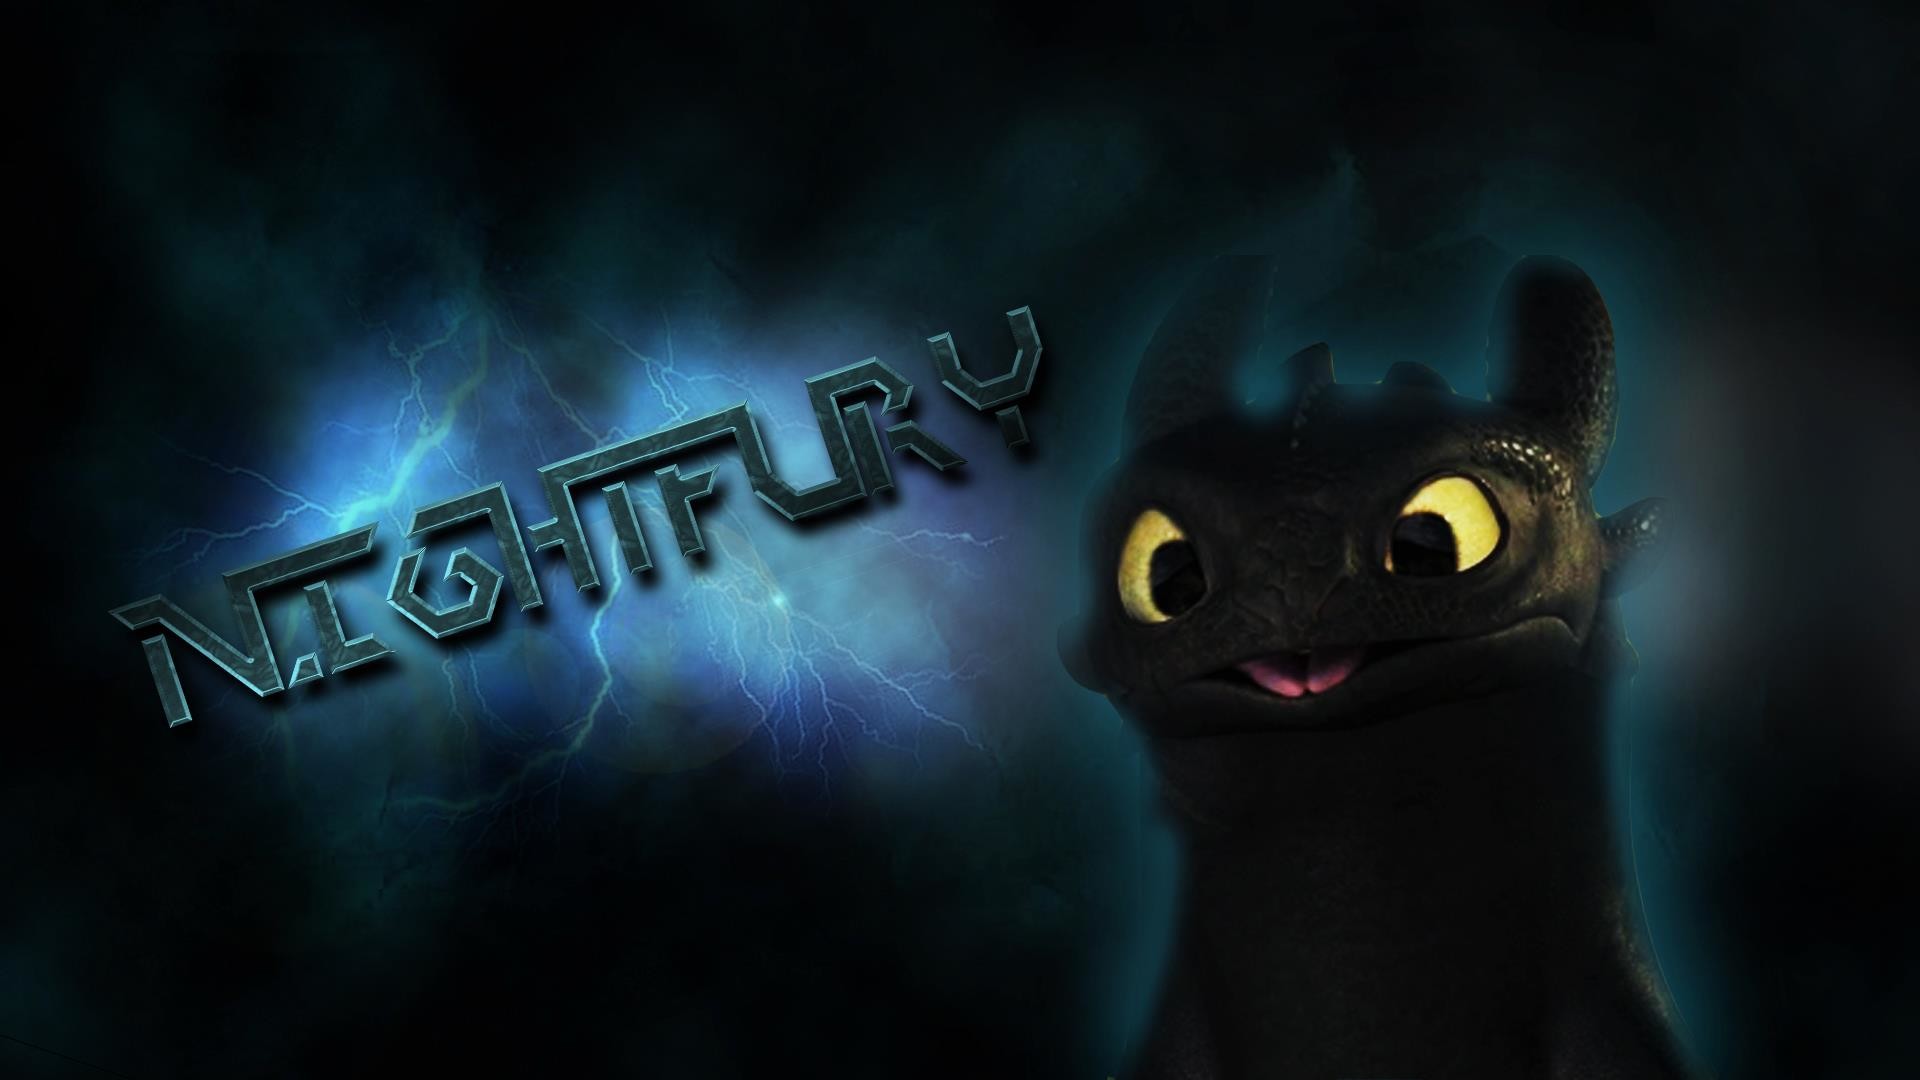 Toothless 1080P, 2K, 4K, 5K HD wallpapers free download | Wallpaper Flare